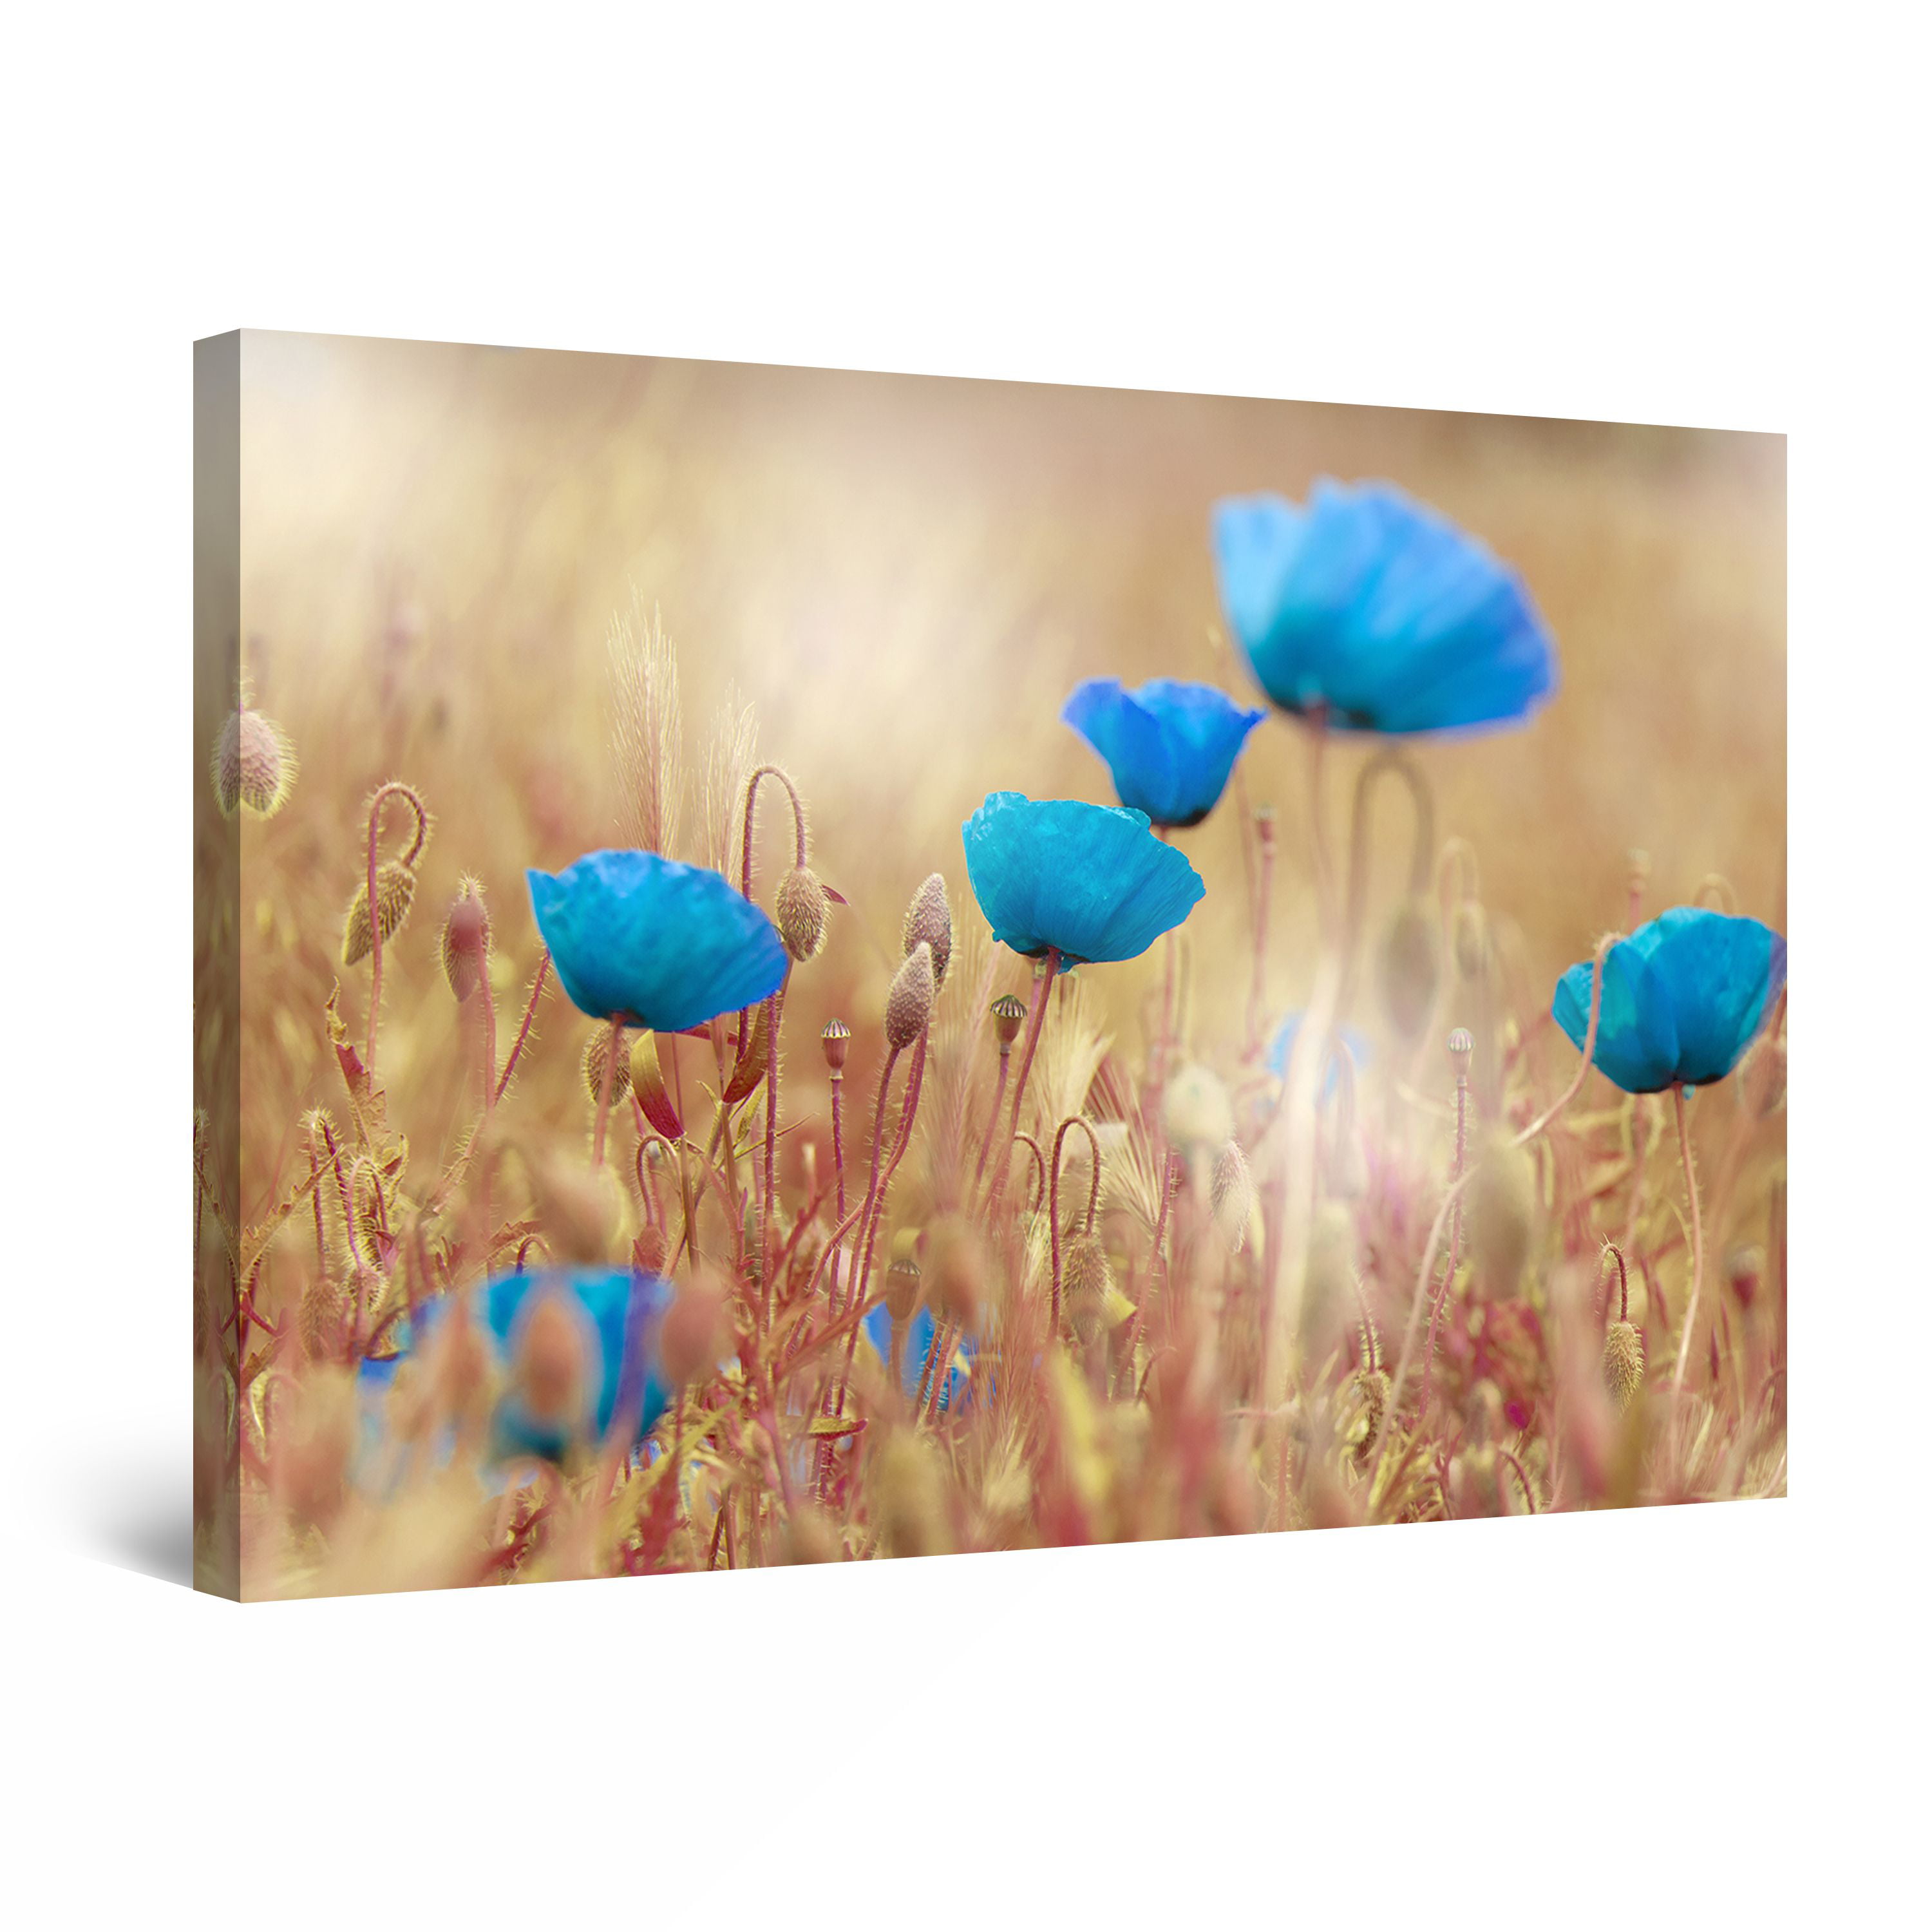 Details about   BLOOMING POPPY FIELD CANVAS WALL ART PICTURES FRAMED PRINTS HOME KITCHEN POSTERS 